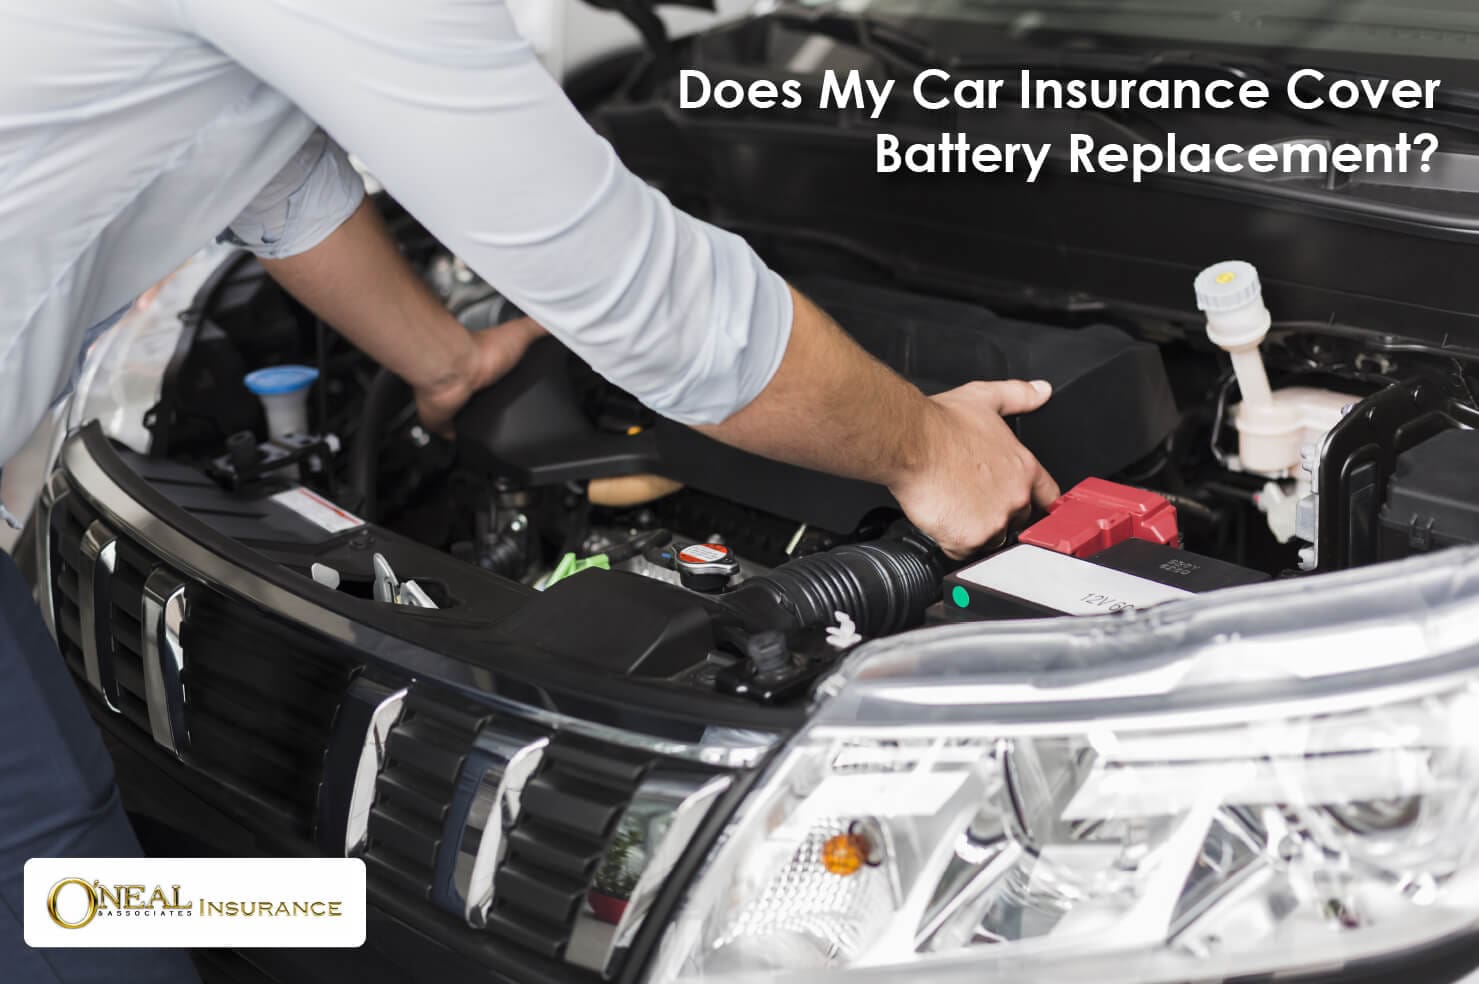 Does My Car Insurance Cover Battery Replacement?